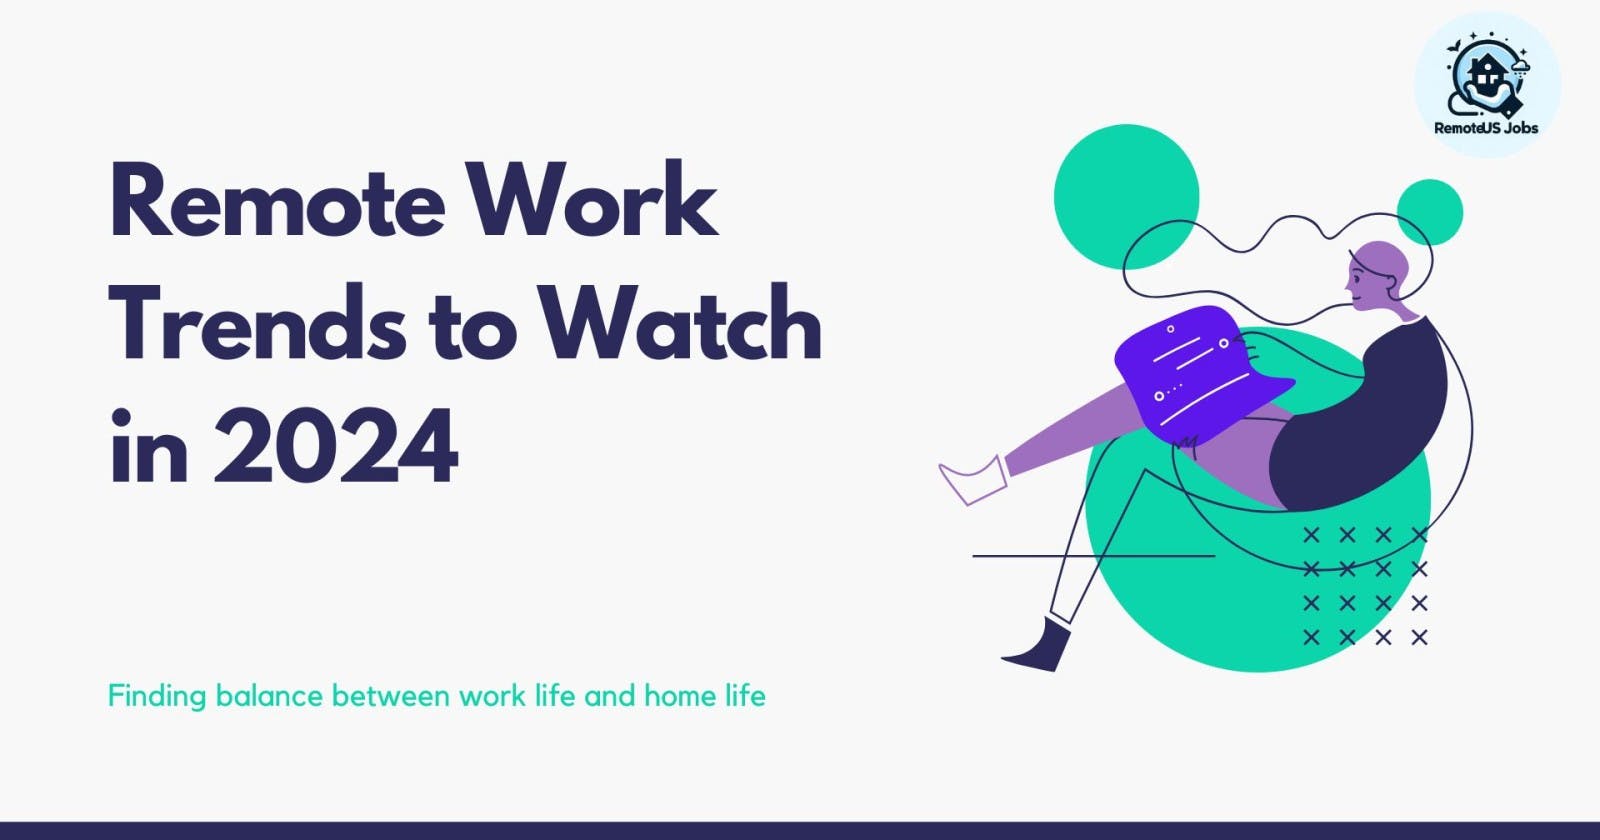 Remote Work Trends to Watch in 2024